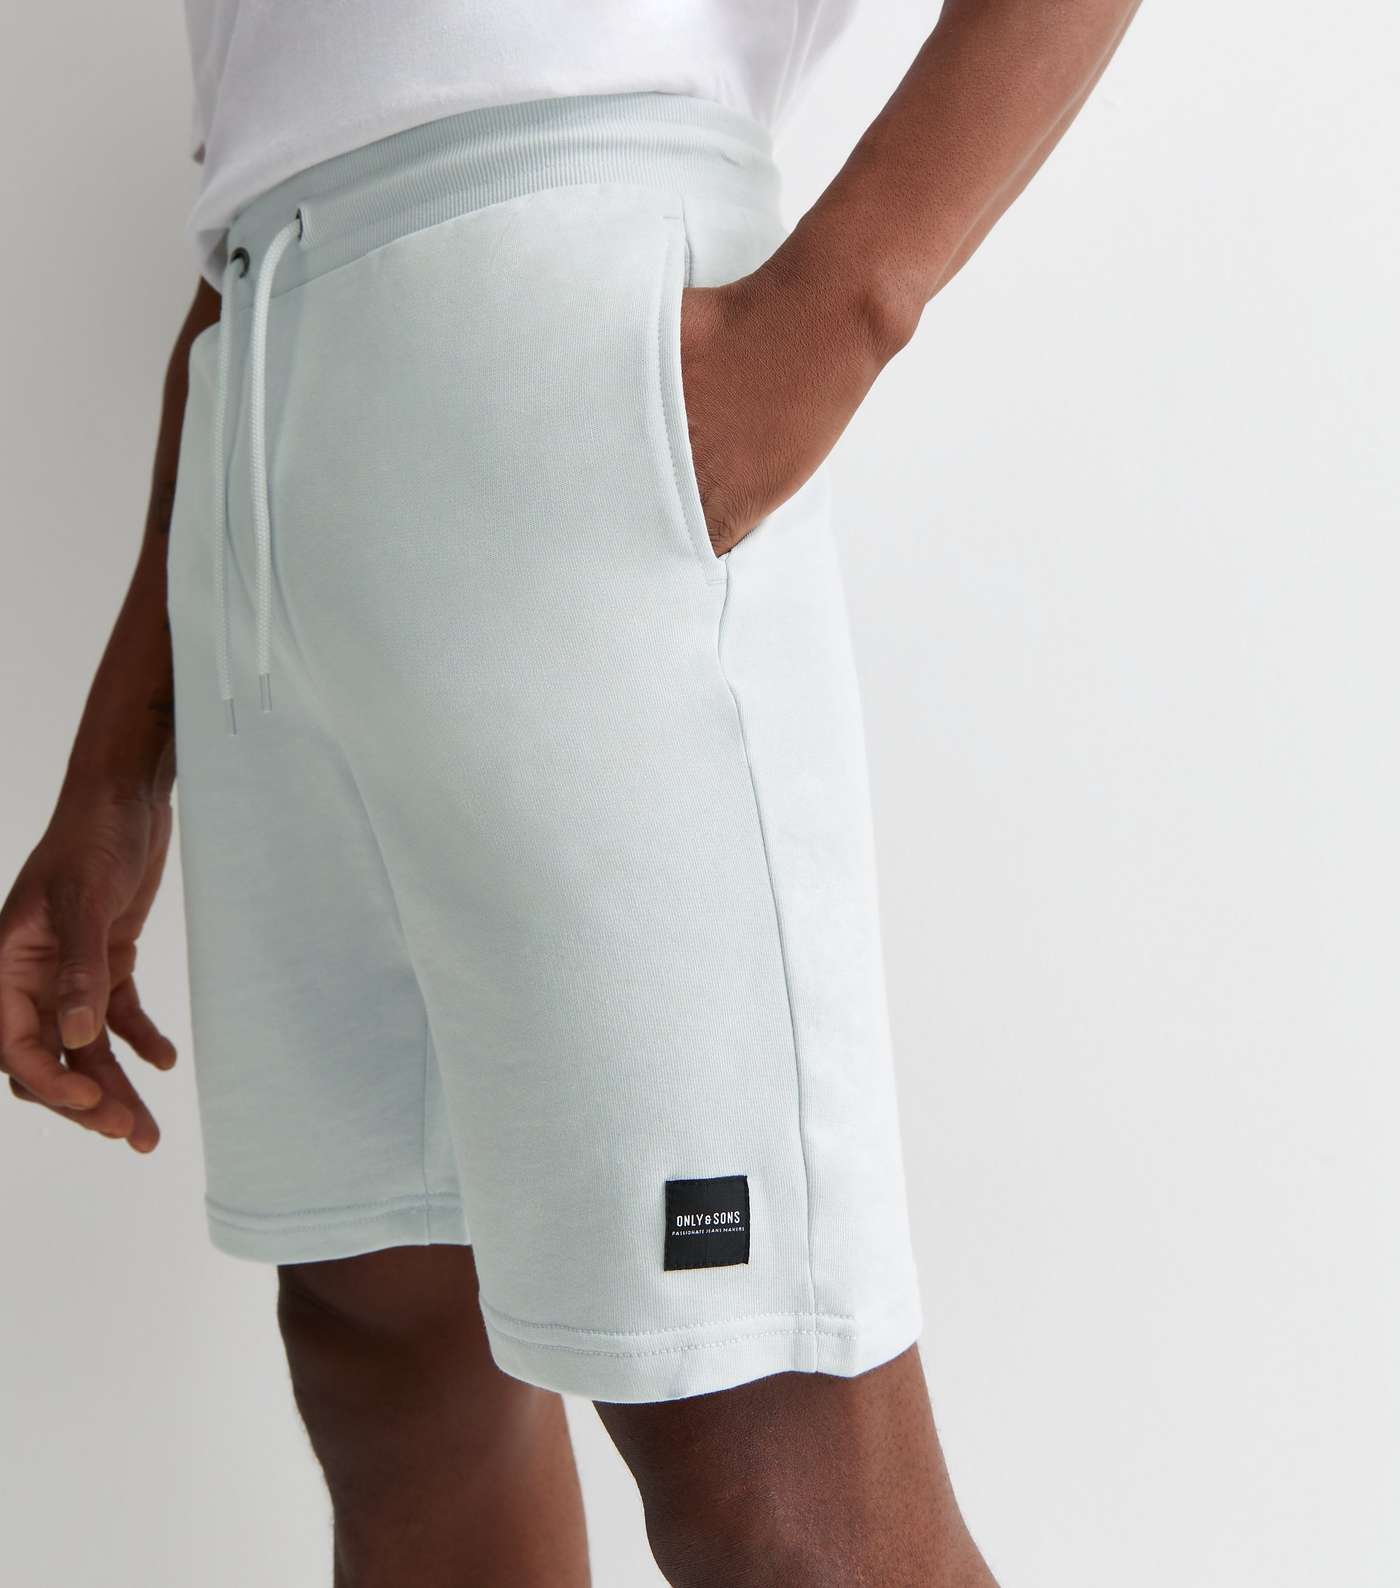 Only & Sons Blue Jersey Shorts Image 3